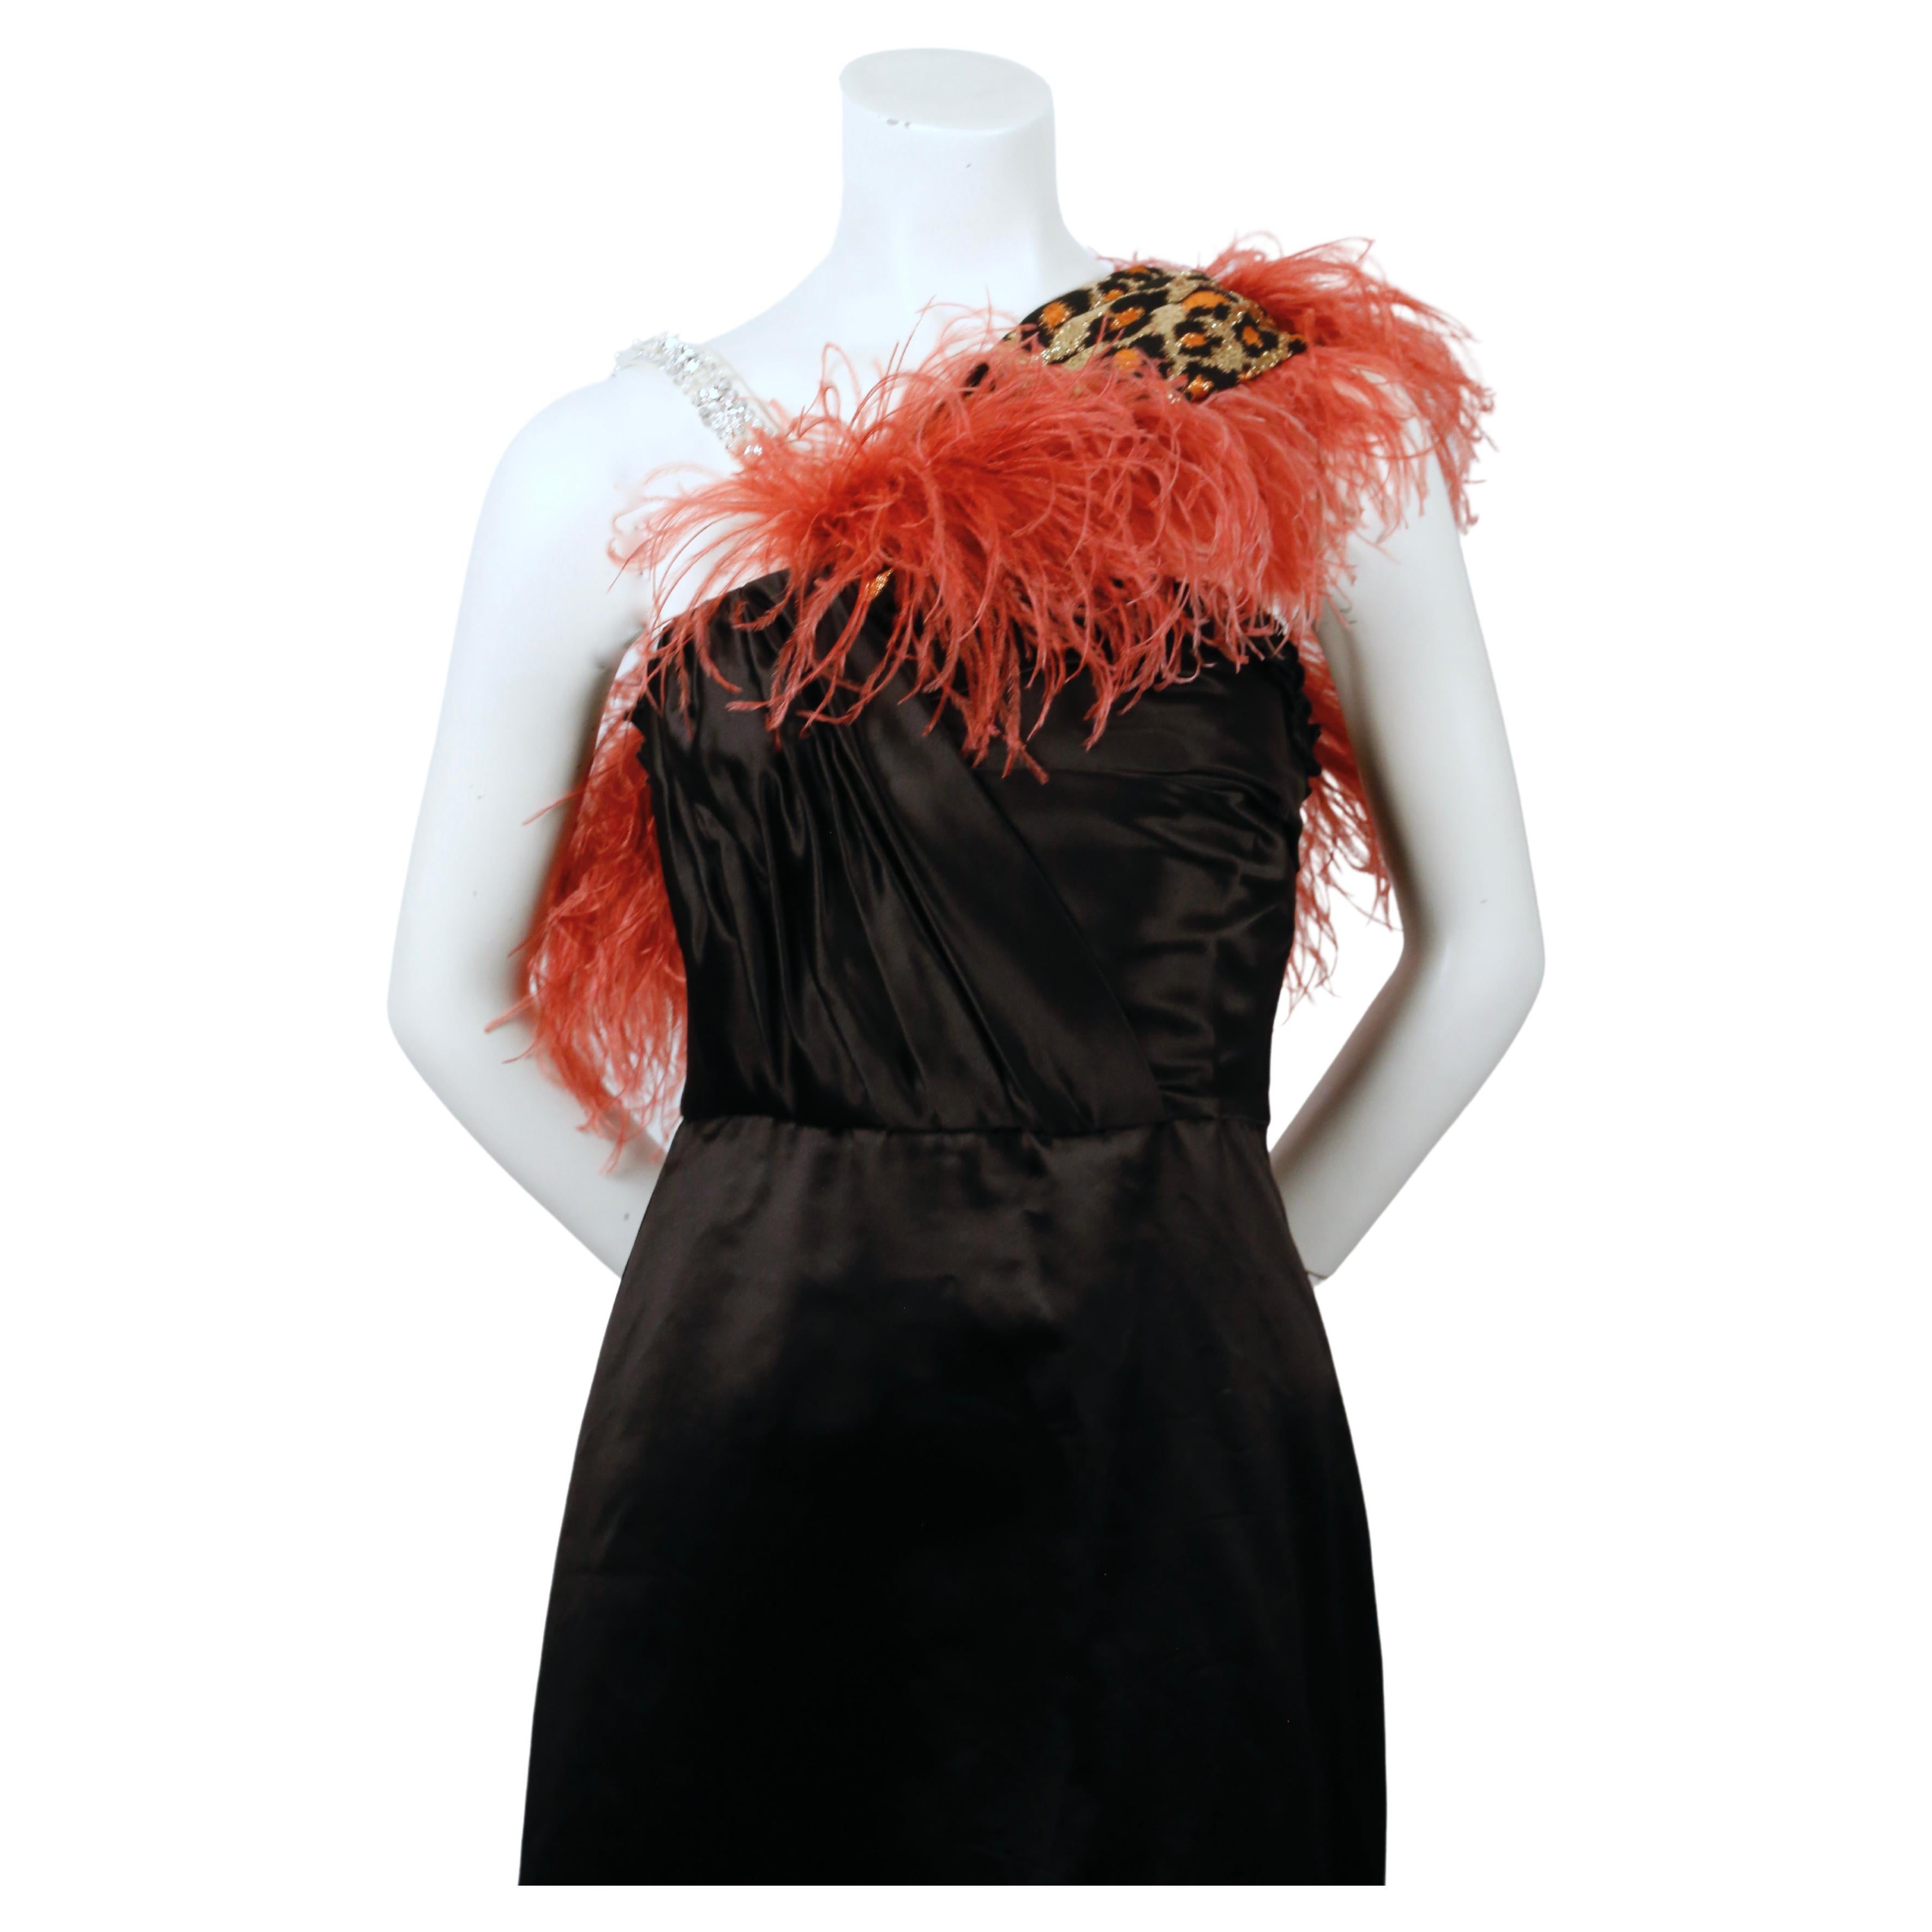 Very rare, black duchesse satin evening gown with ostrich feather trim, beaded strap and metallic leopard accent designed by Miu Miu as seen on the 2019 resort runway. Italian size 40. Approximate measurements: bust 32.5